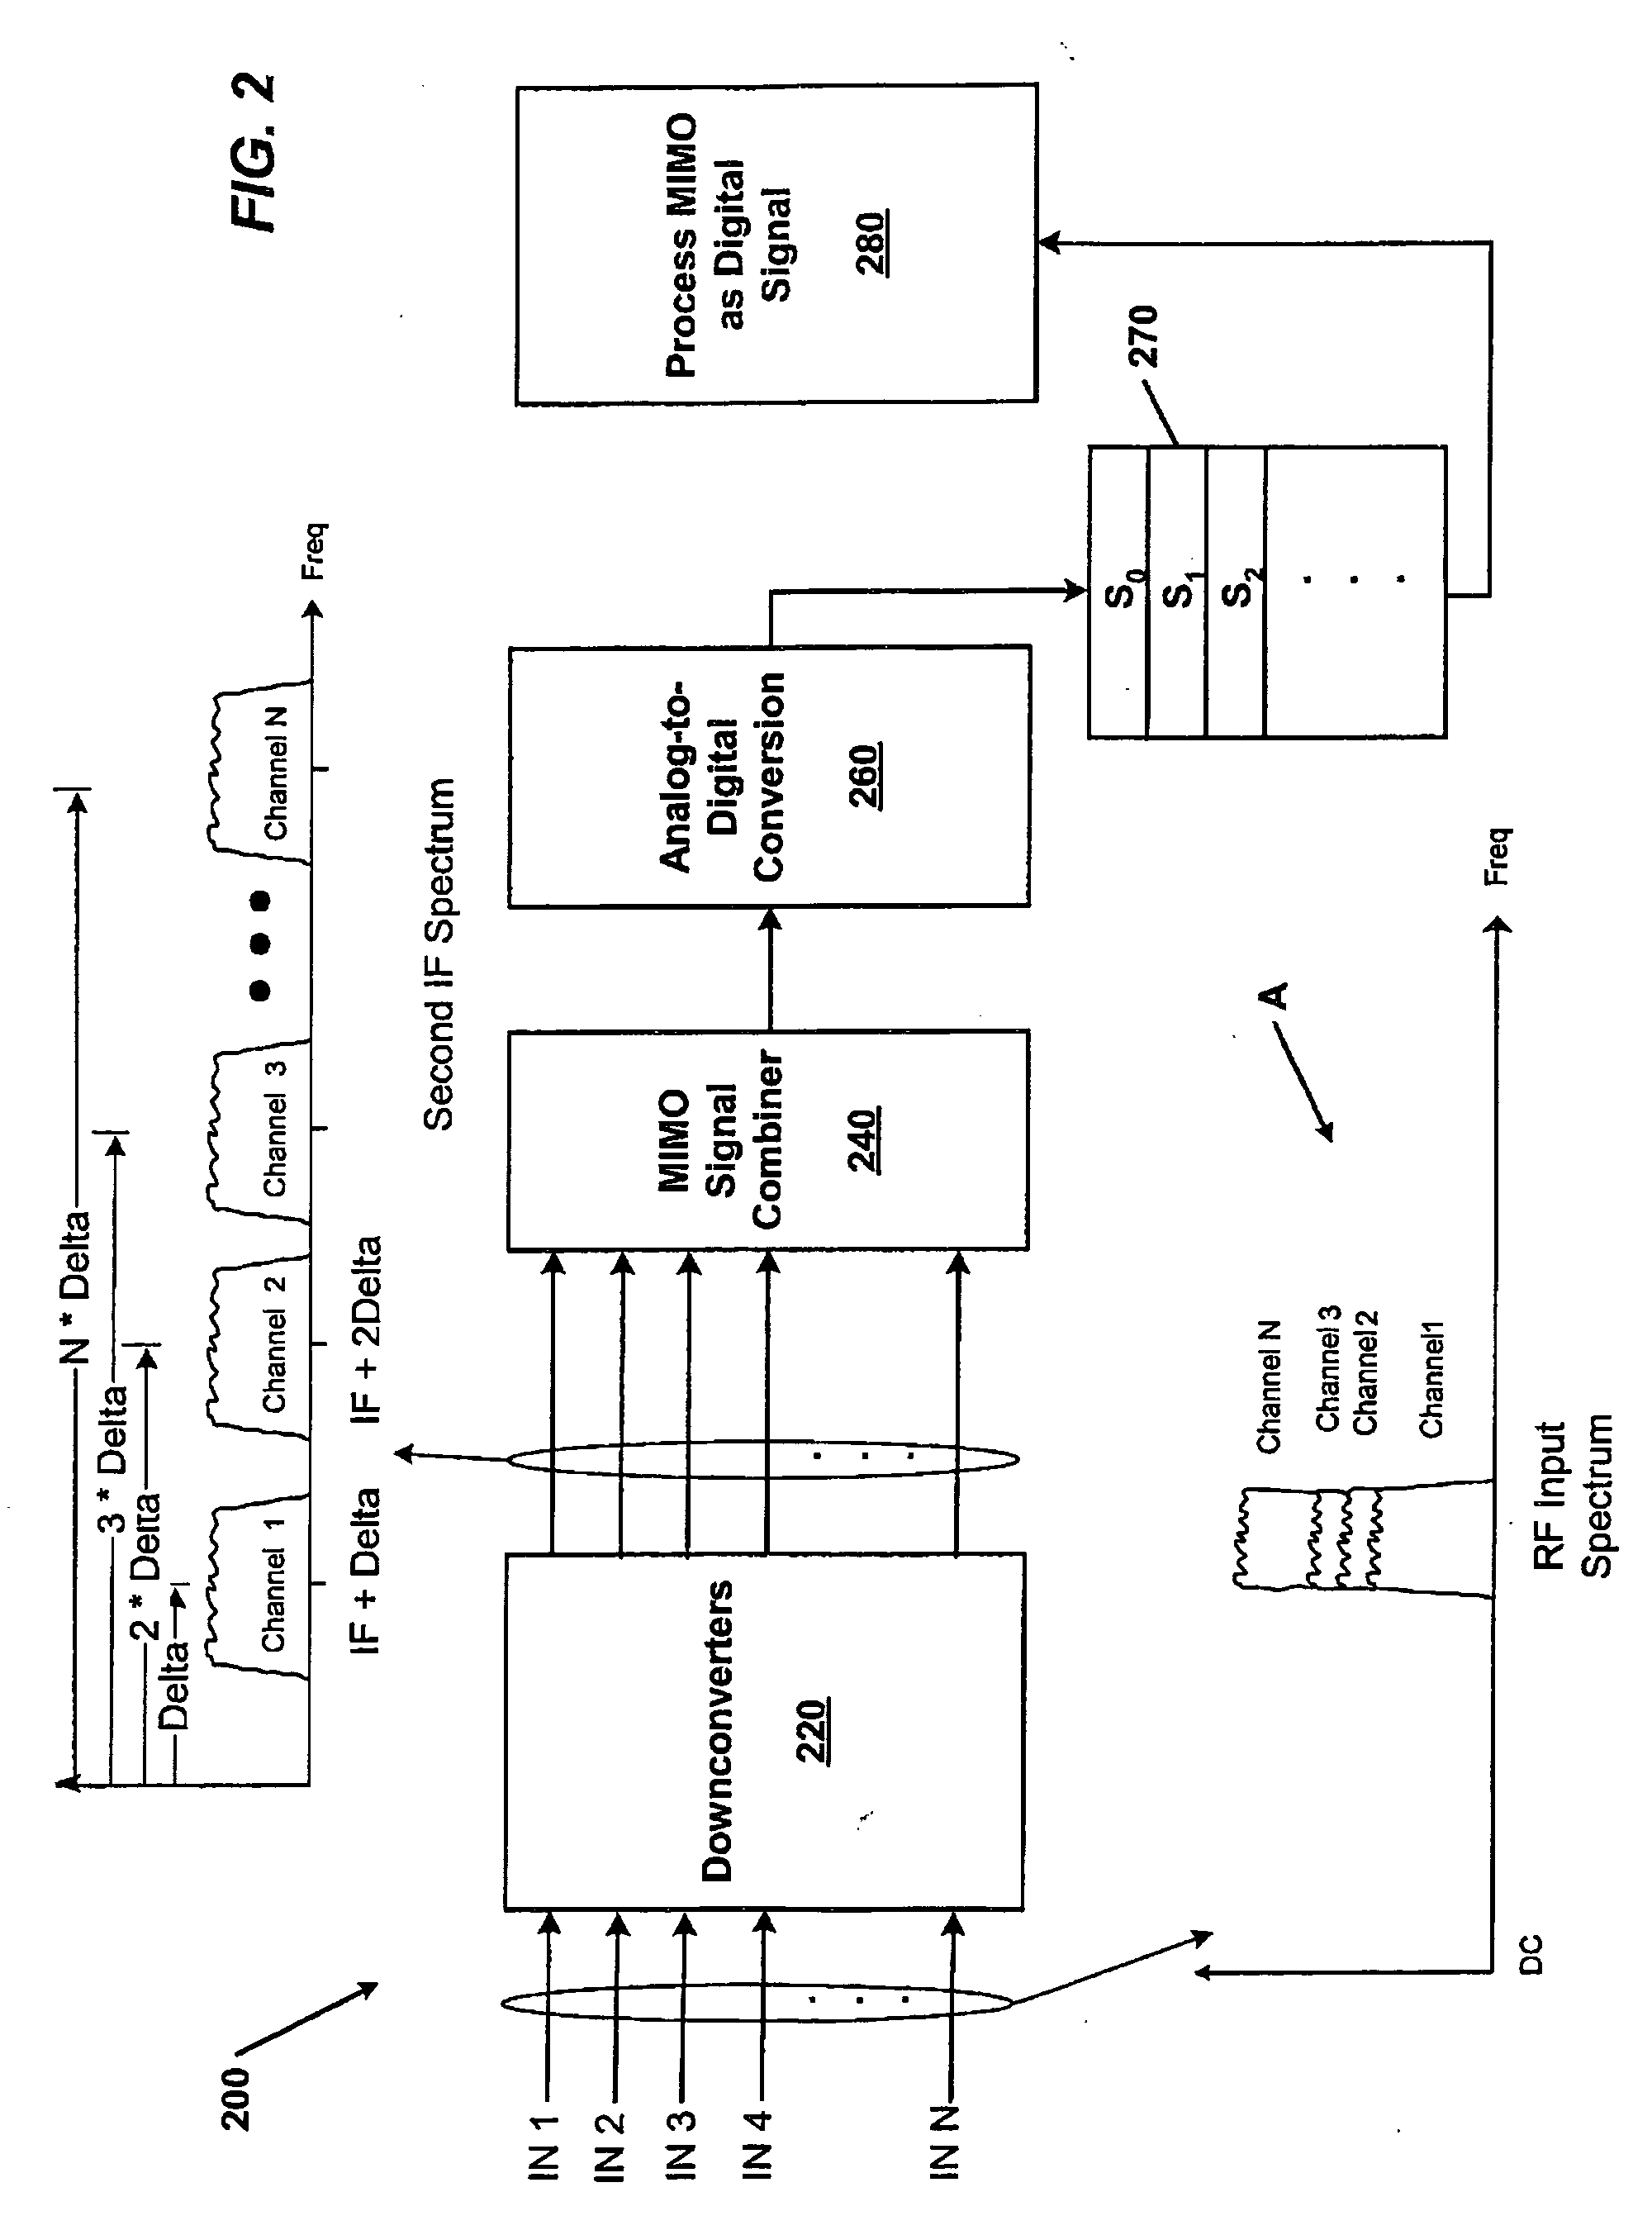 Systems and methods for receiving multiple input, multiple output signals for test and analysis of multiple-input, multiple-output systems